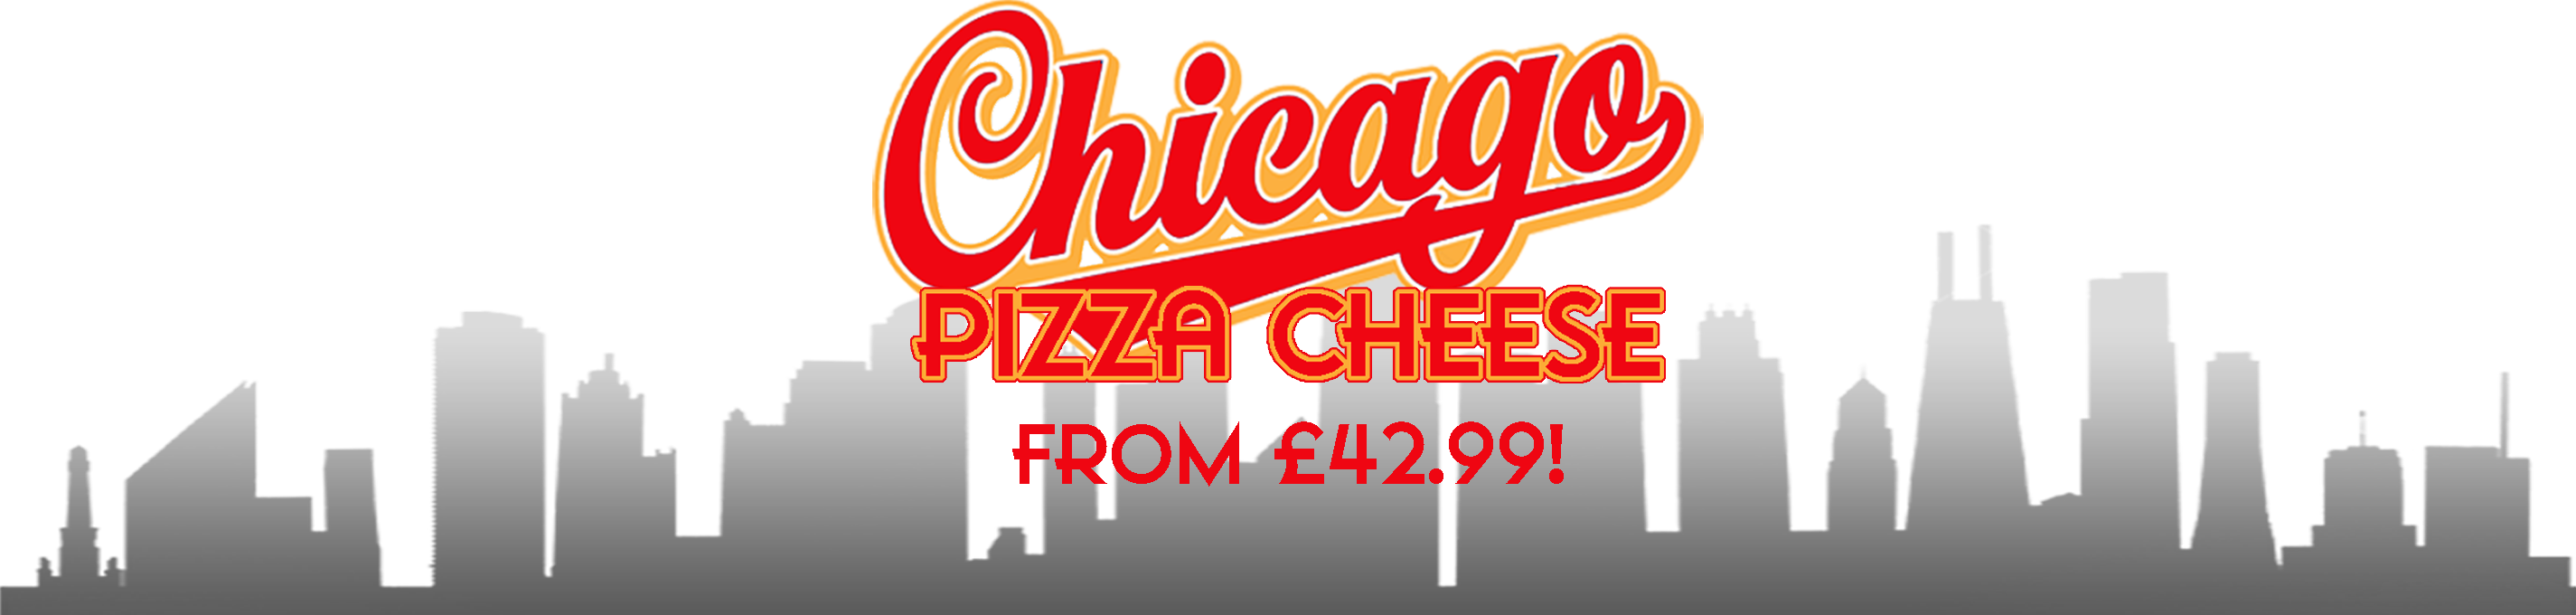 Chicago Pizza Cheese